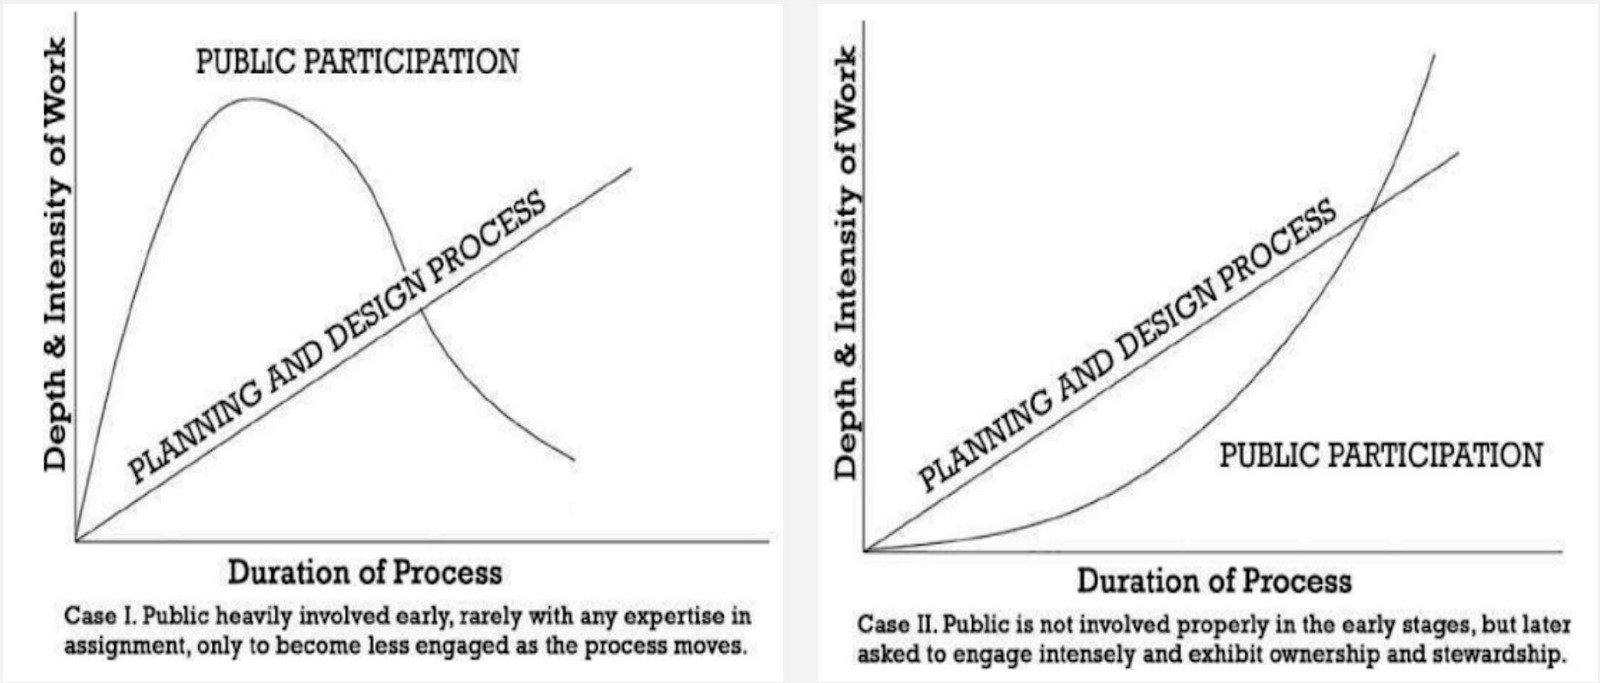 Tactical Urbanism and How it Complements Participatory Planning - Sheet4